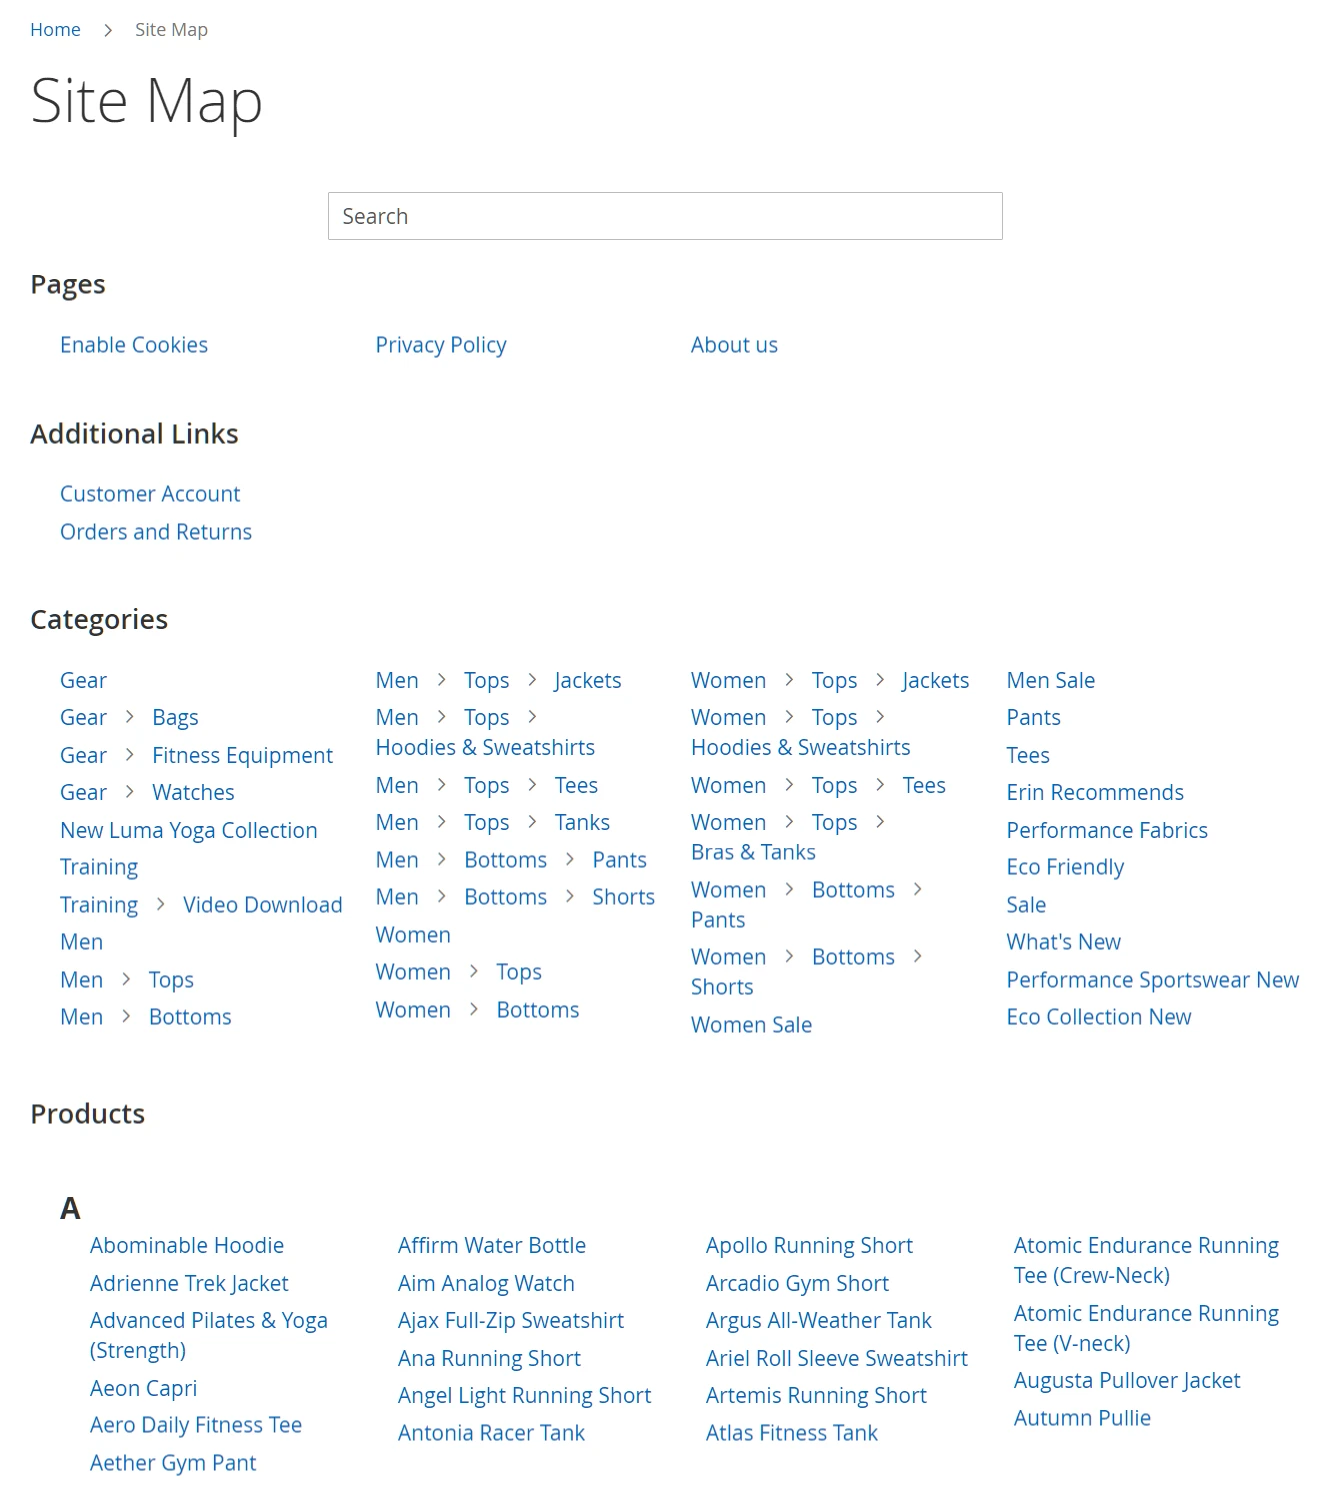 A user-friendly sitemap looks like a table of website’s contents